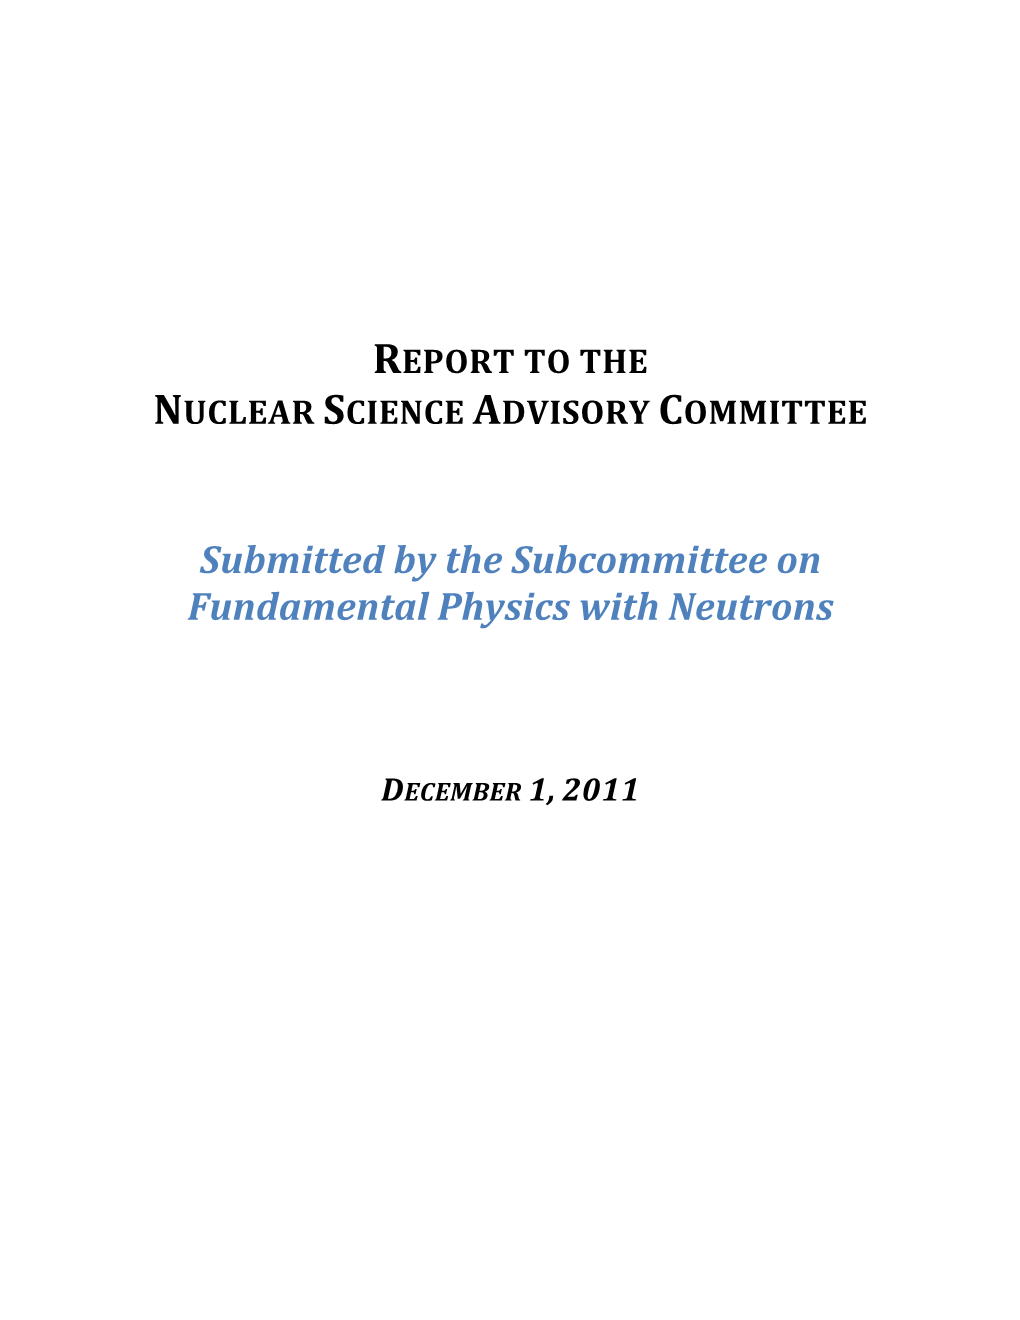 Submitted by the Subcommittee on Fundamental Physics with Neutrons